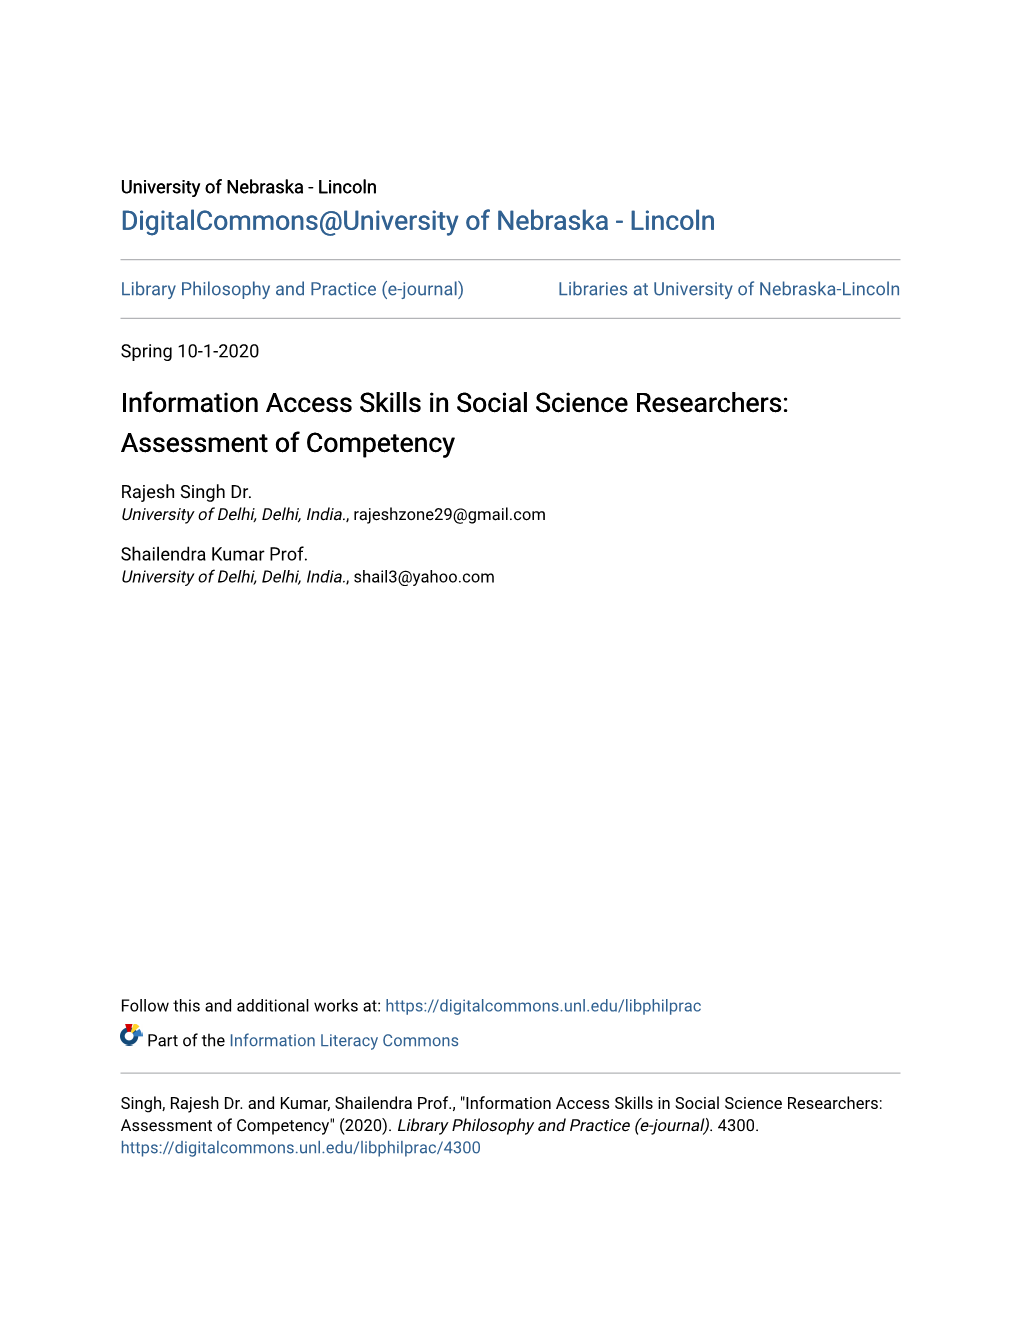 Information Access Skills in Social Science Researchers: Assessment of Competency